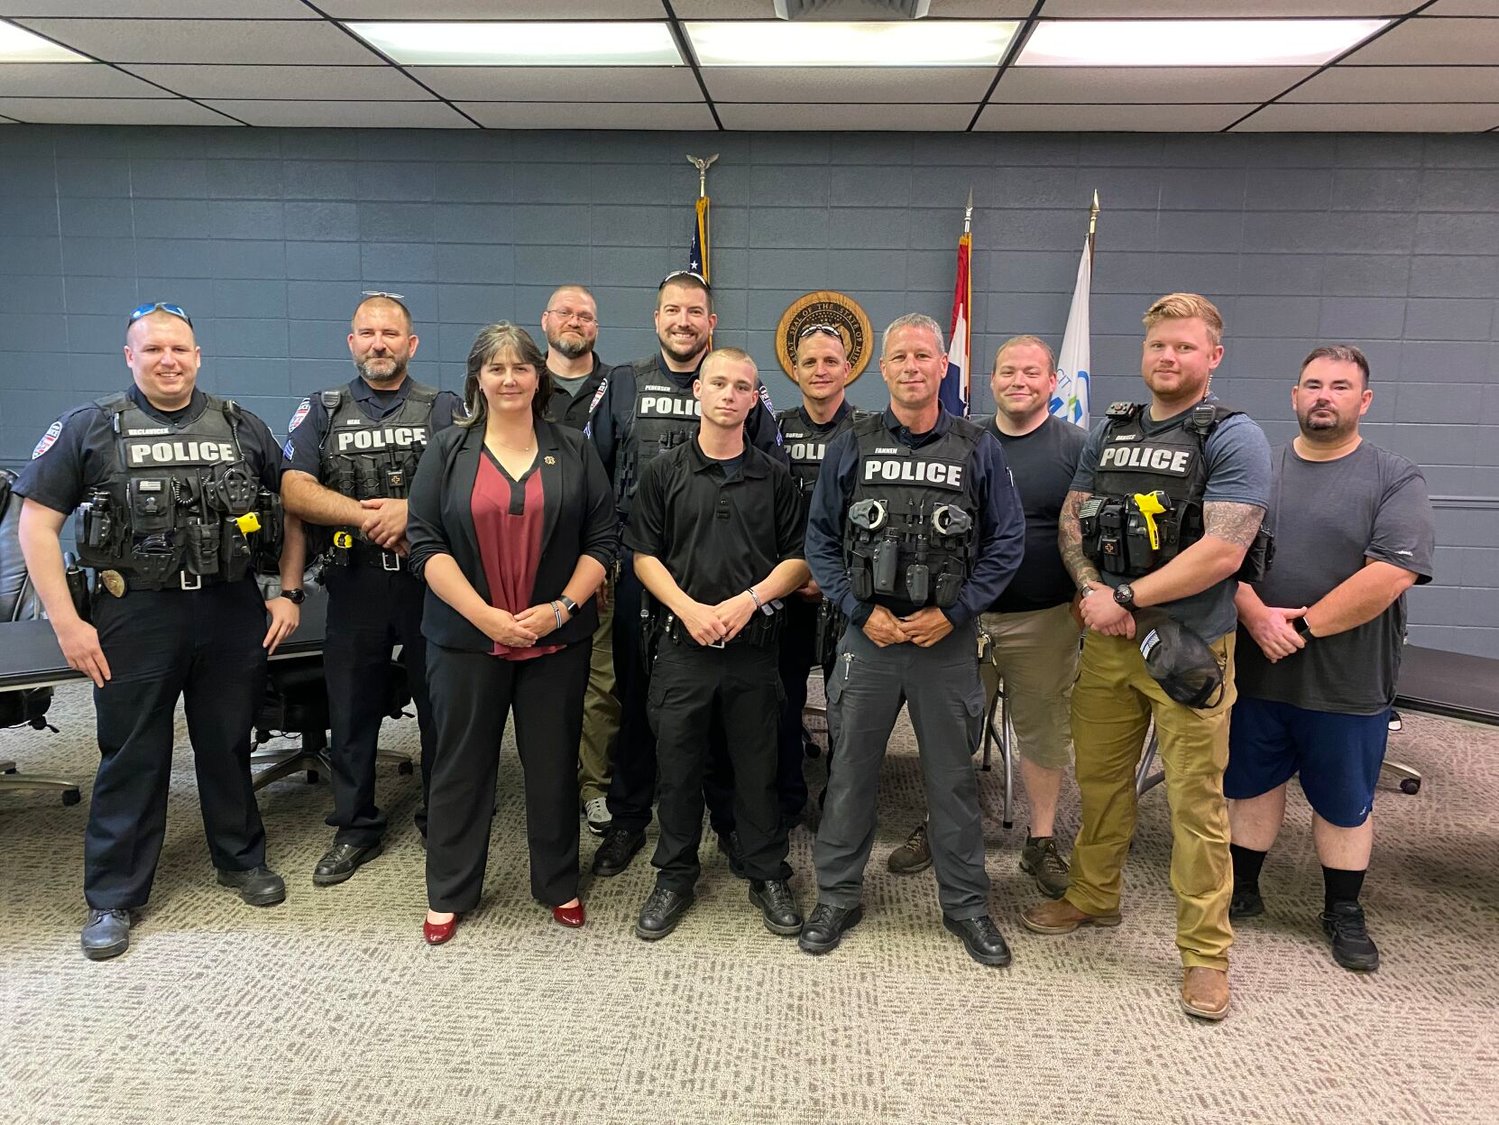 Pictured are members of the Marshfield Police Department including (front left to right) Mayor Natalie McNish, new officer Garrett Fannen and Chief Doug Fannen.